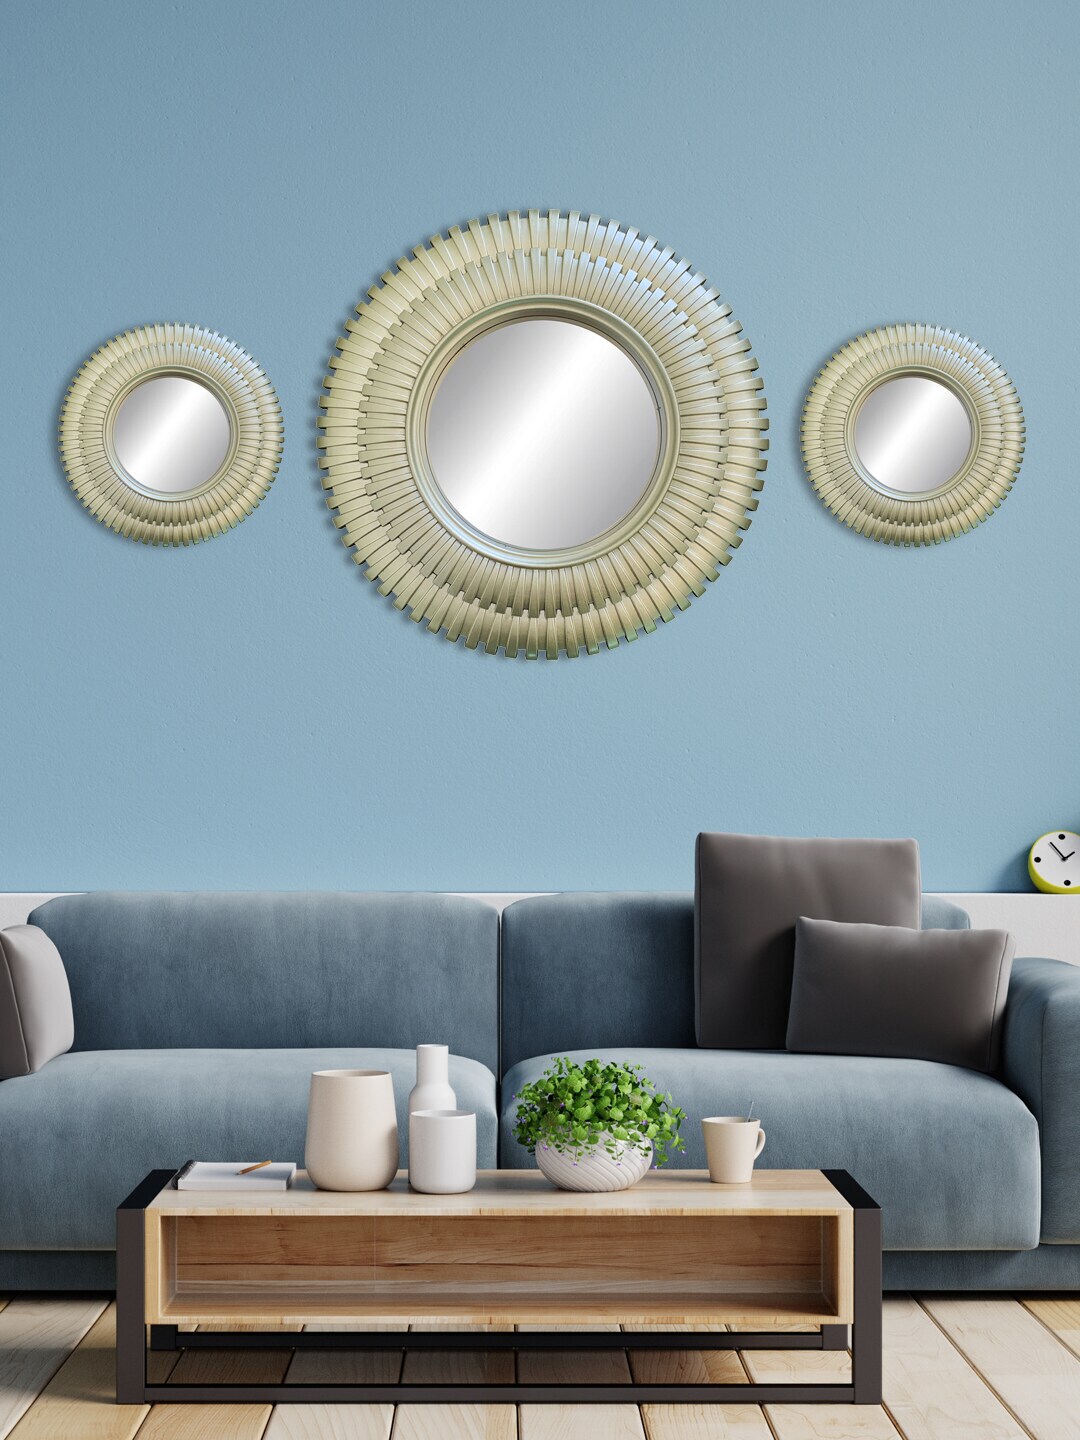 HomeTown Set Of 3 Champagne Mirage Round Decorative Mirrors Price in India